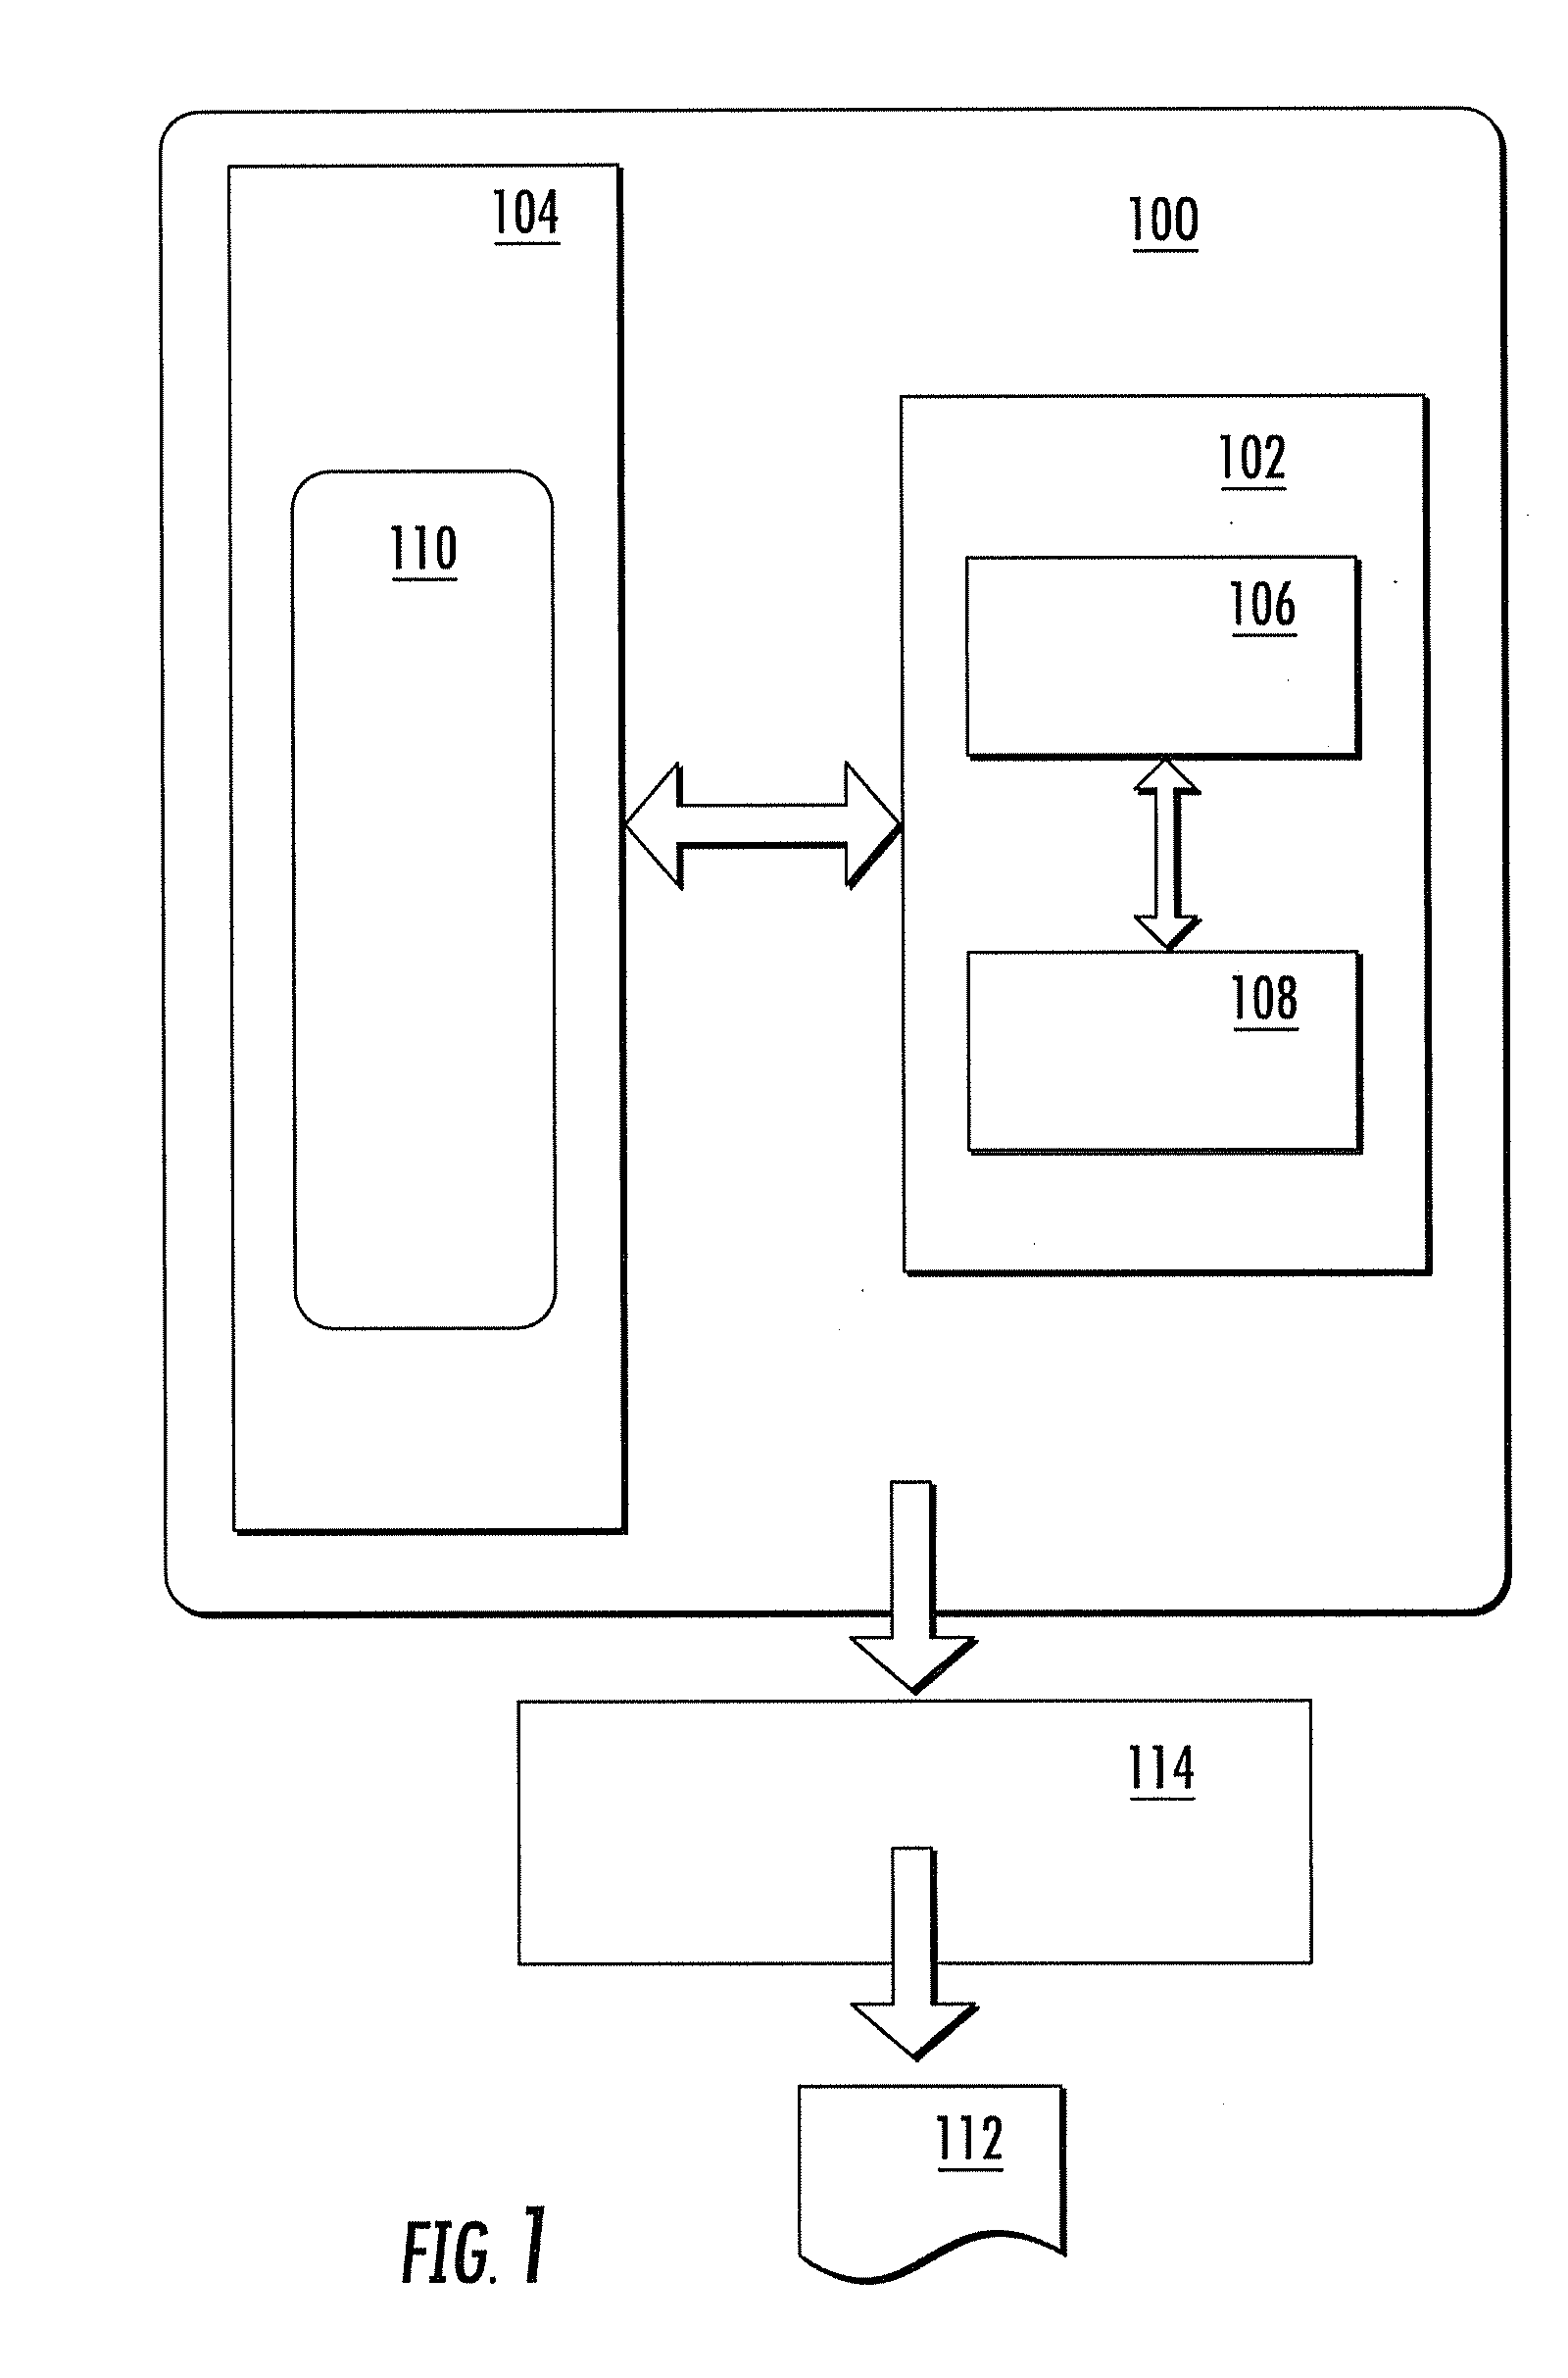 System and methods for creating reduced test sets used in assessing subject response to stimuli